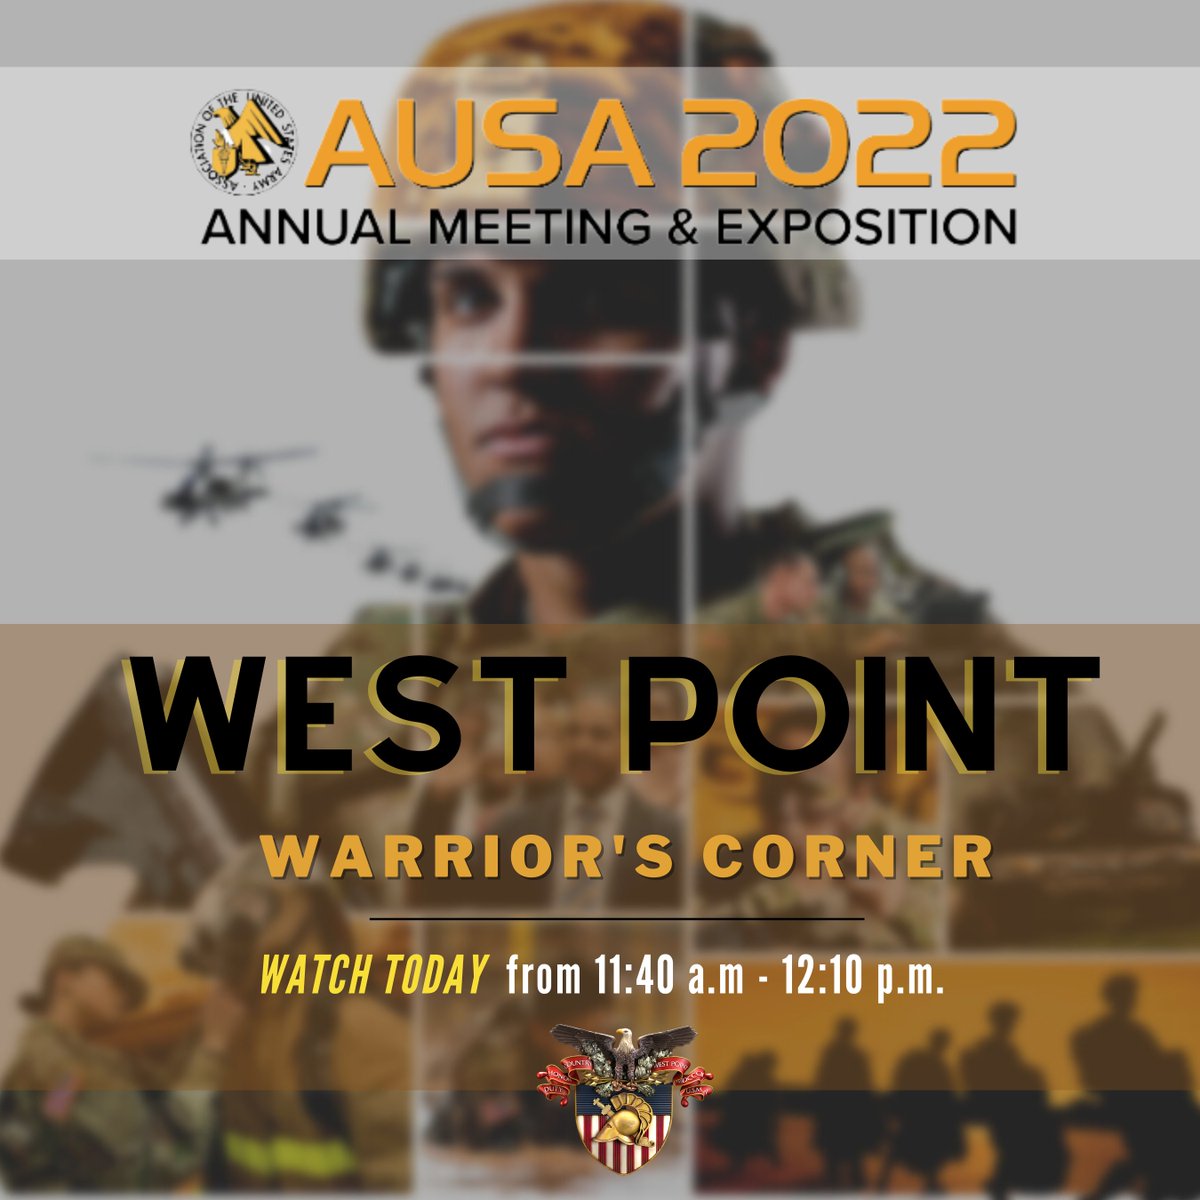 Watch West Point at AUSA's Warrior's Corner TODAY, from 11:40 am -12:10pm here: youtube.com/c/westpoint Brig. Gen. Shane R. Reeves, Dean of the Academic Board, will discuss how WP leads the way in producing decisive thinkers for the Army for future warfare. #AUSA2022 @AUSAorg